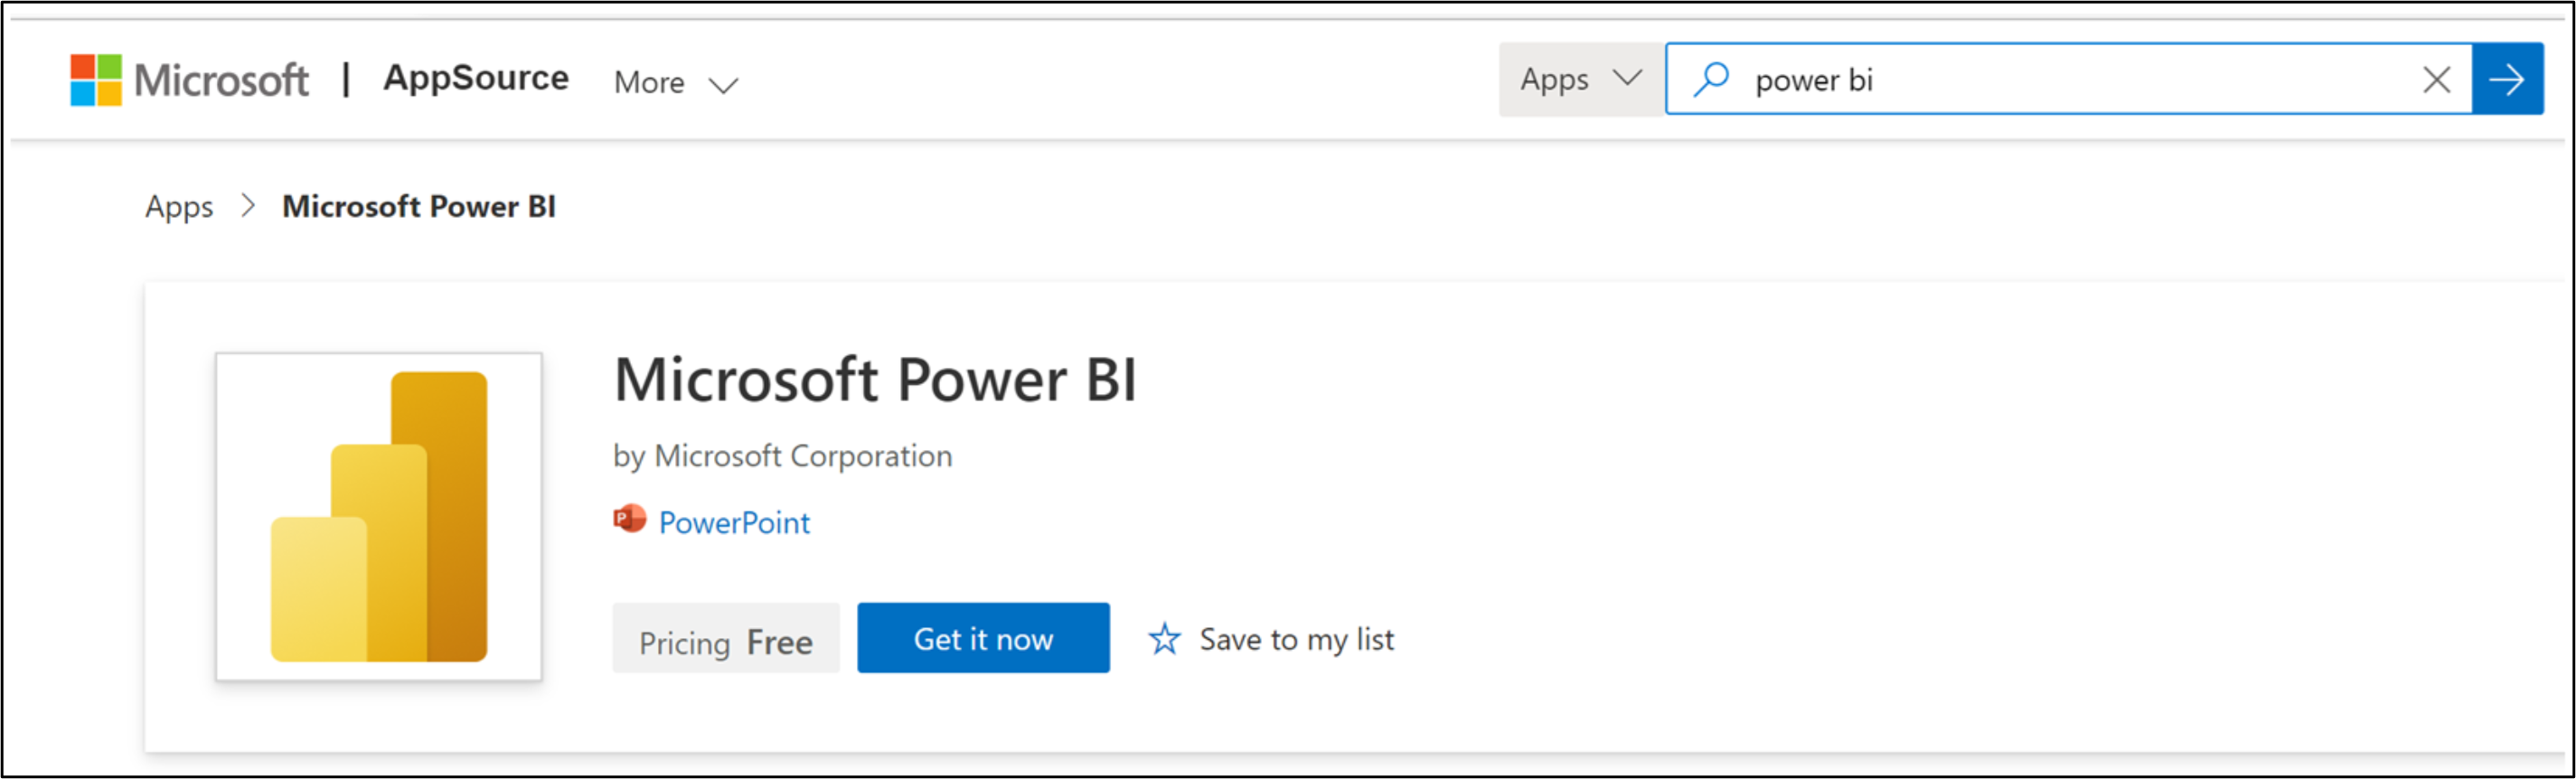 Microsoft App Store displaying the Power BI add-in download page